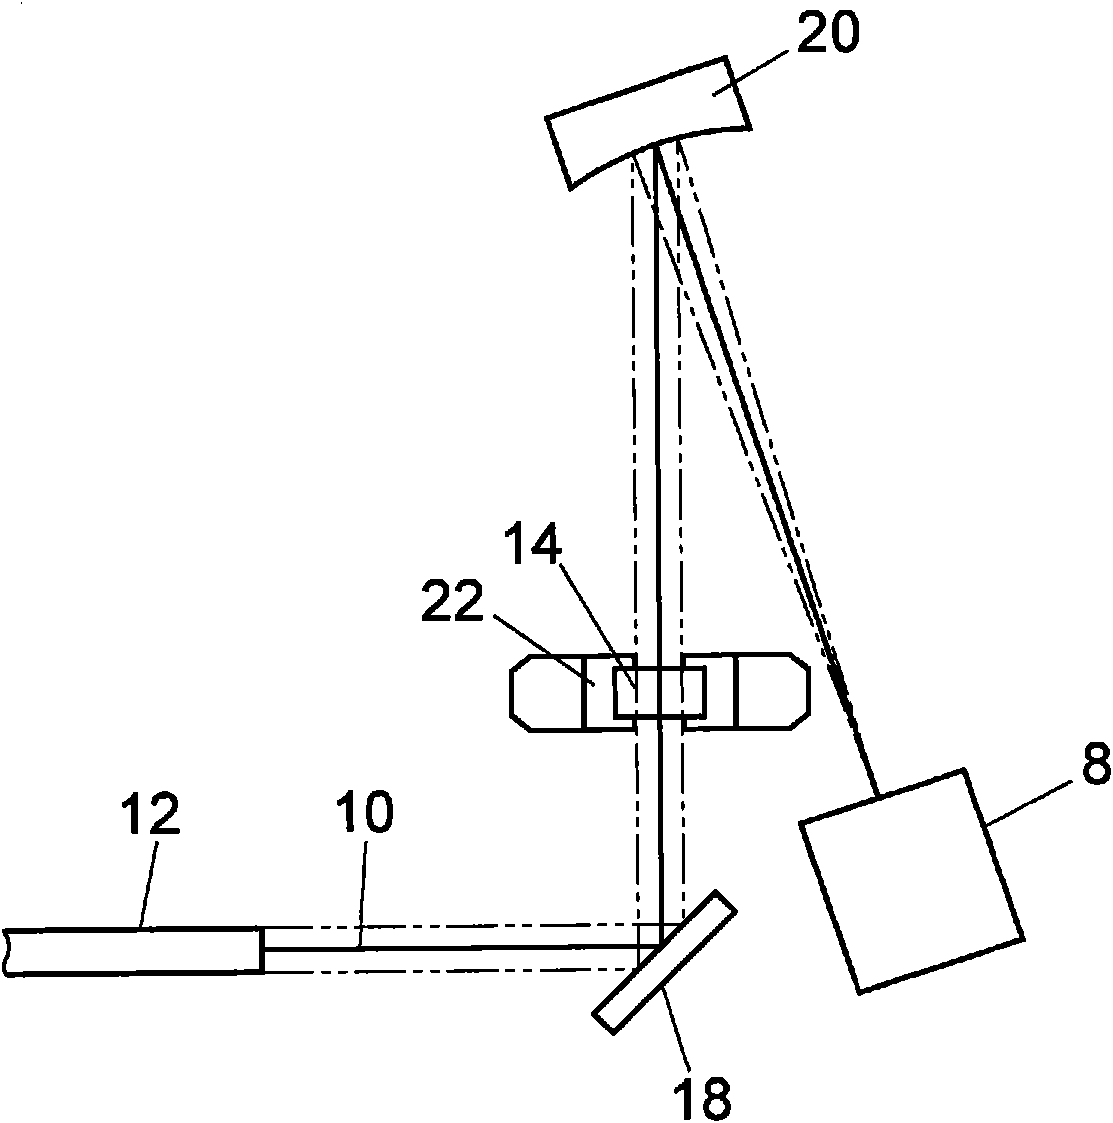 Gas analyzing apparatus with built-in calibration gas cell